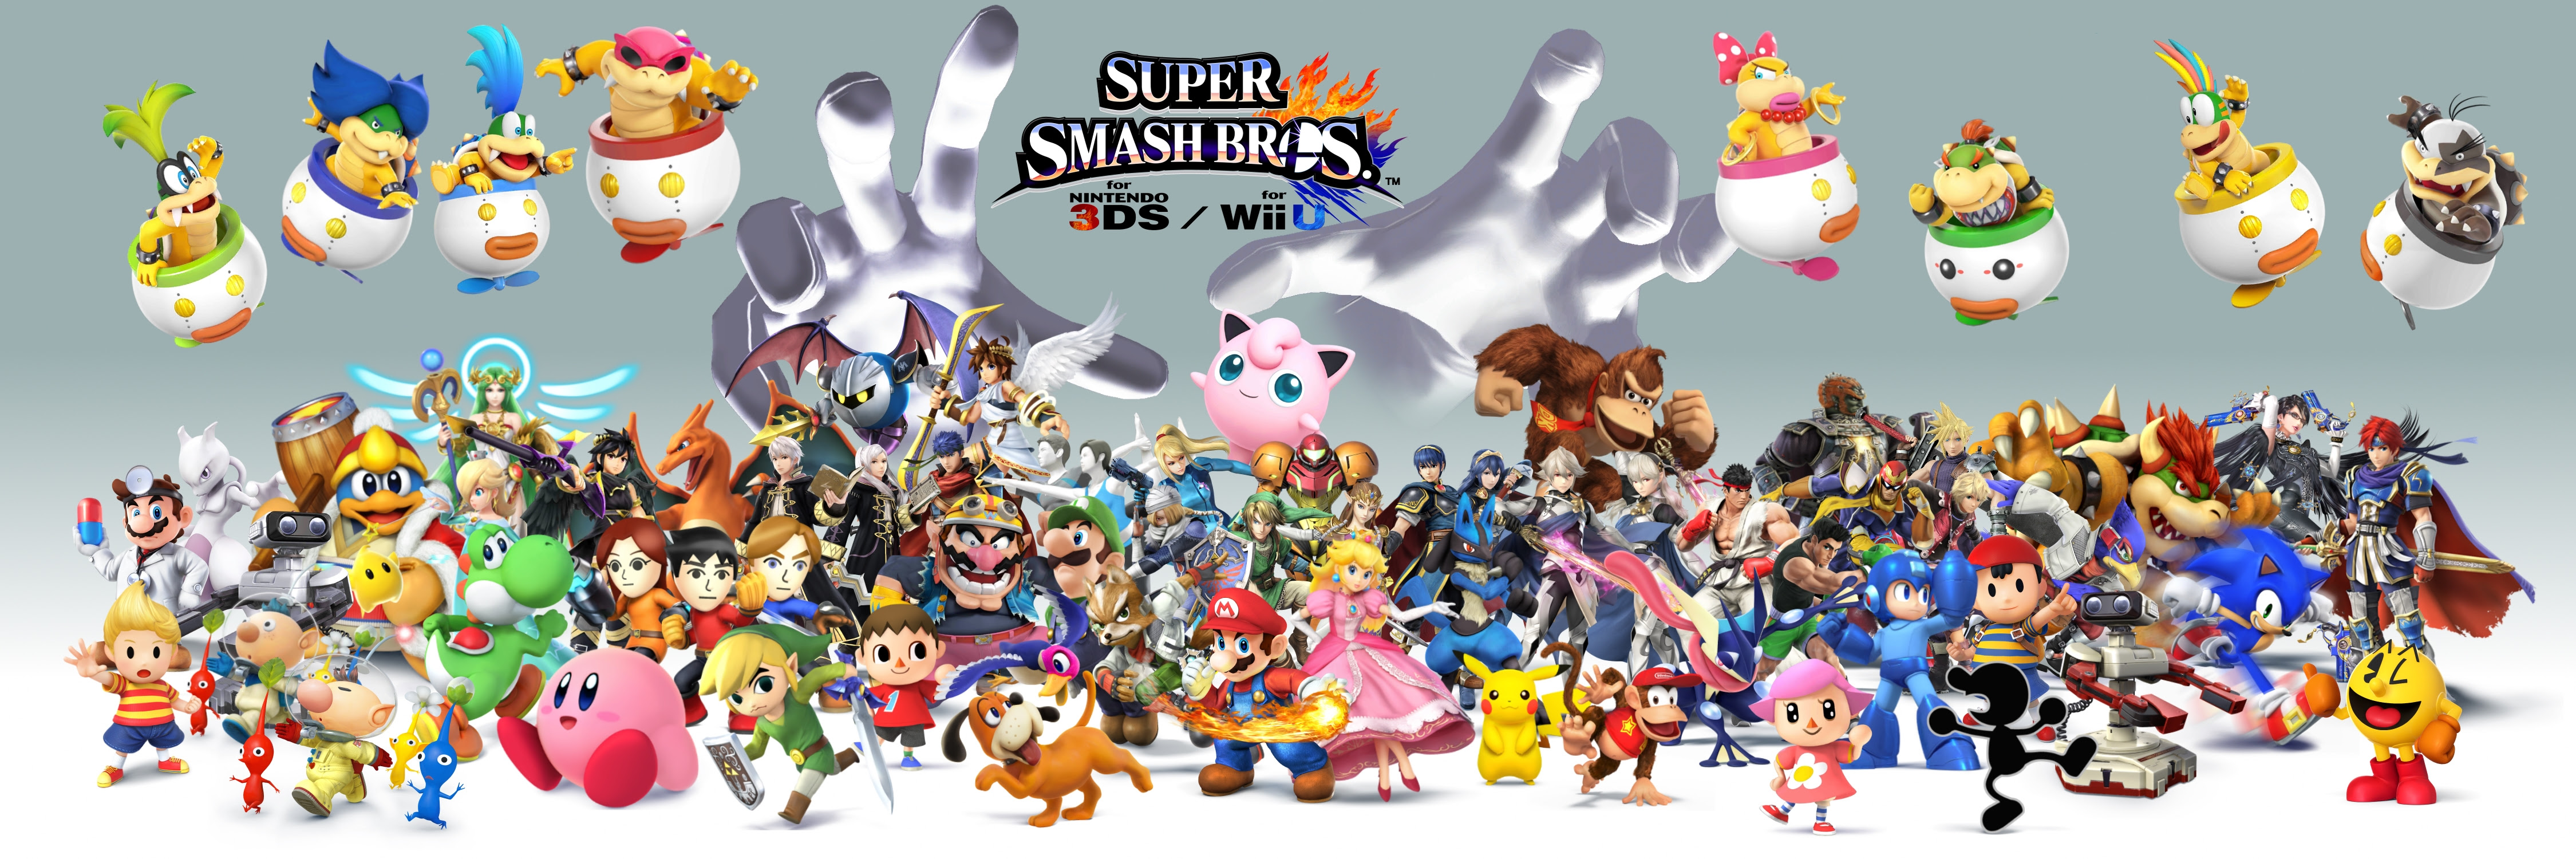 File Blast Unlockable Characters In Super Smash Bros For Nintendo 3ds 